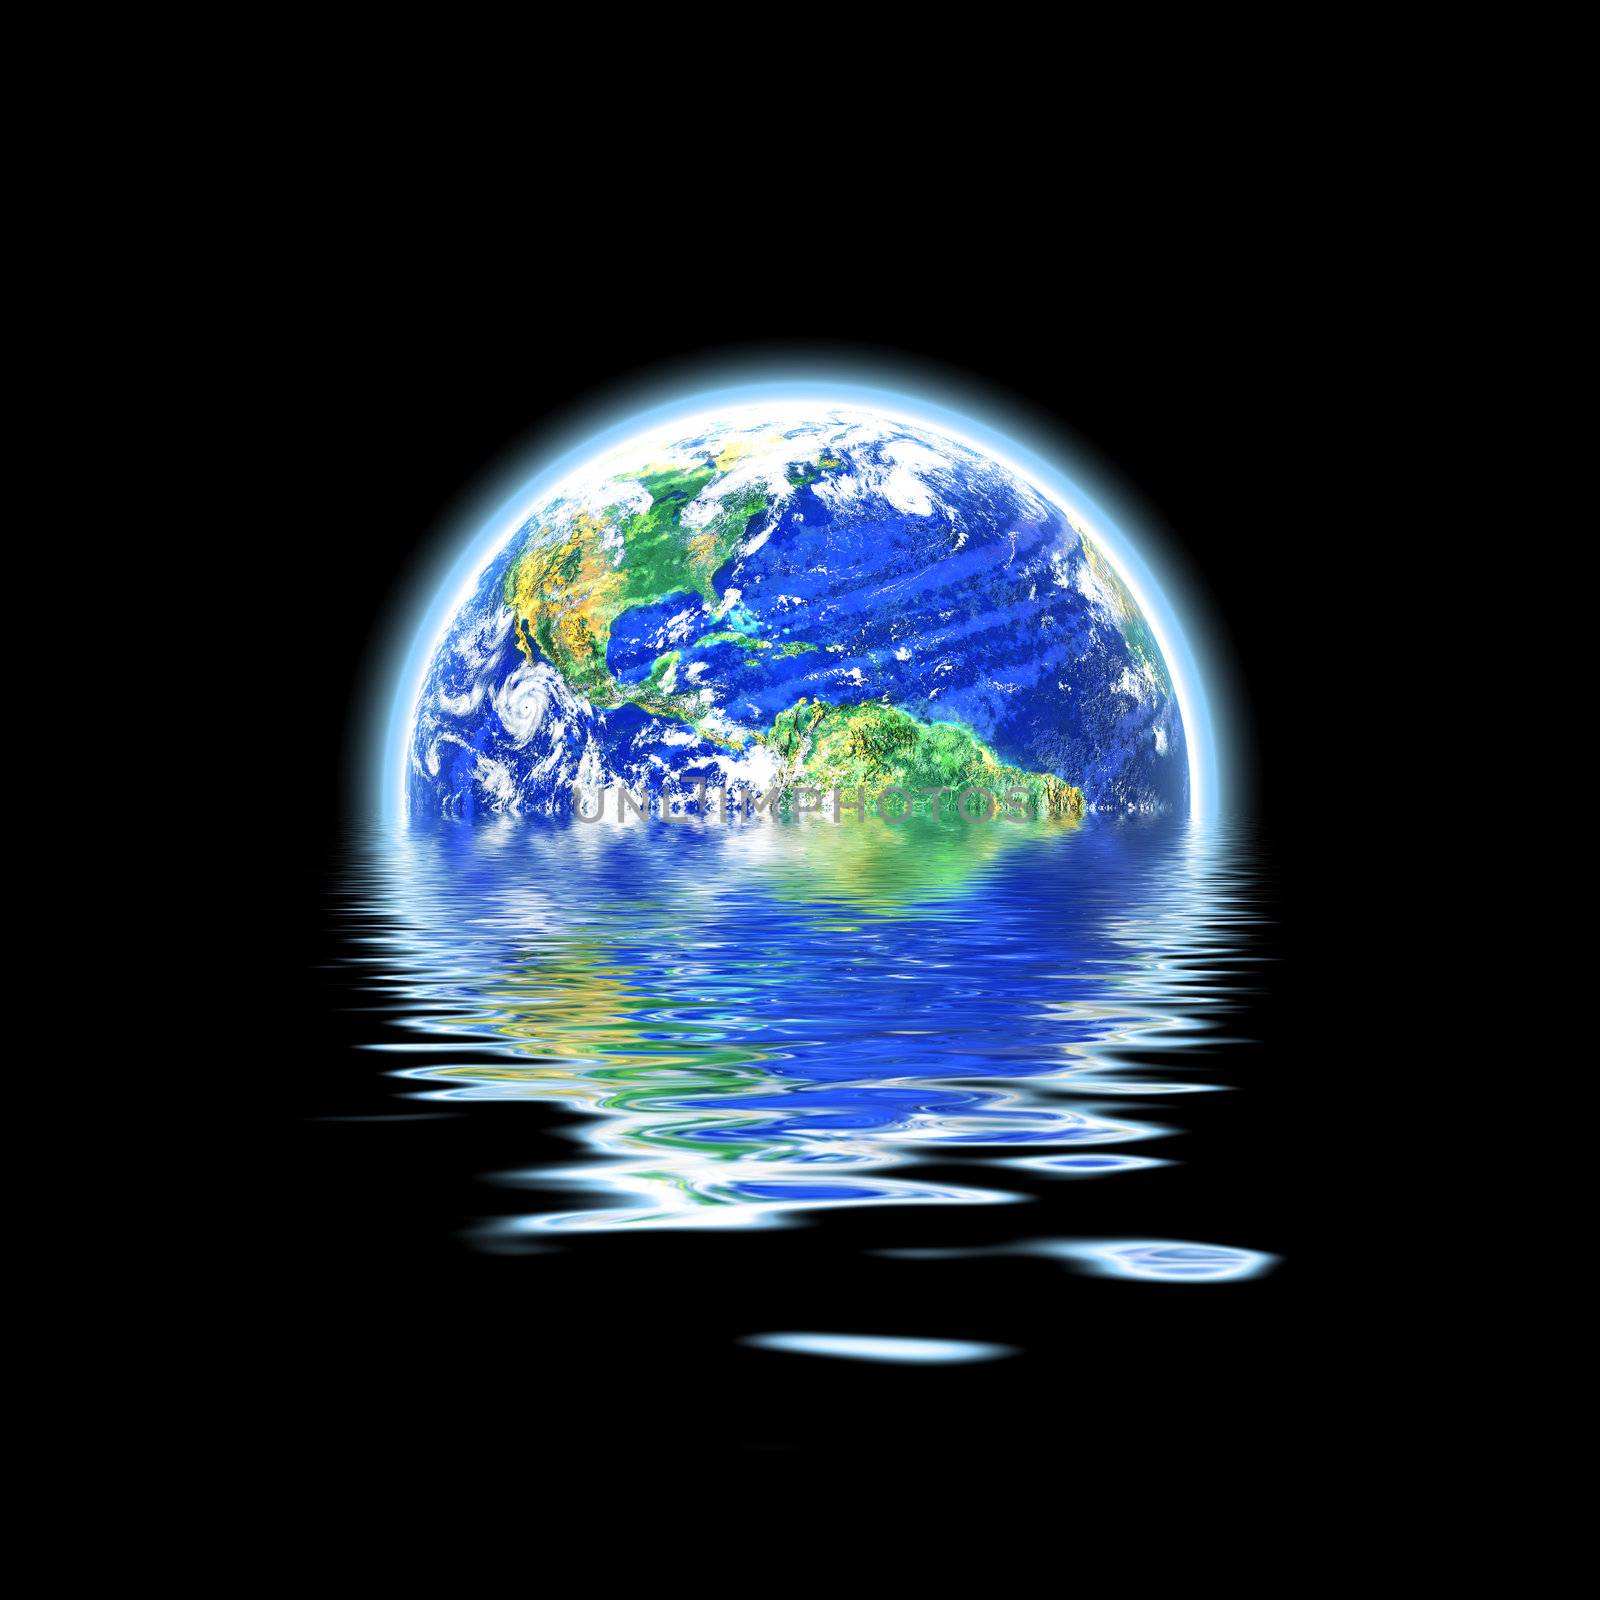 The earth floating in a pool of water that works great for flood concepts global warming or even the scuba diving and oceanography fields. Original earth photo courtesy of NASA.